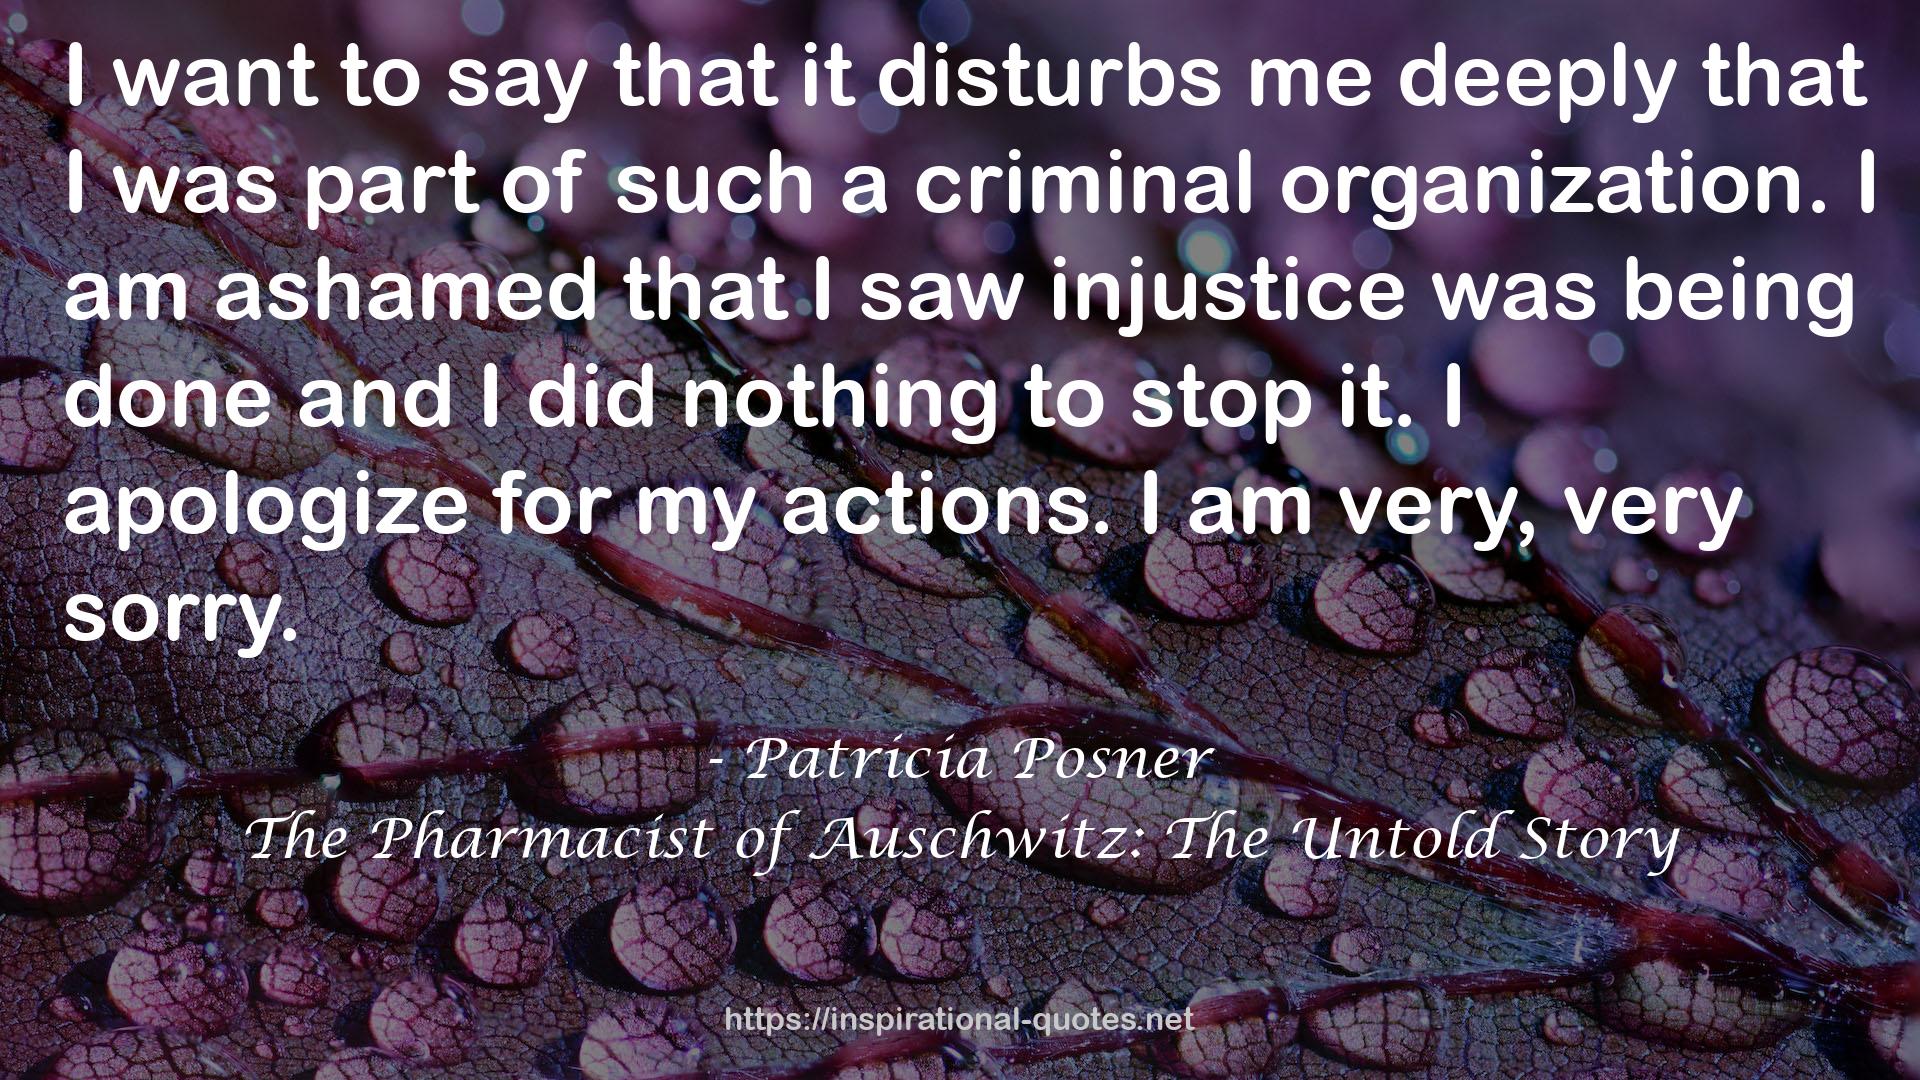 The Pharmacist of Auschwitz: The Untold Story QUOTES